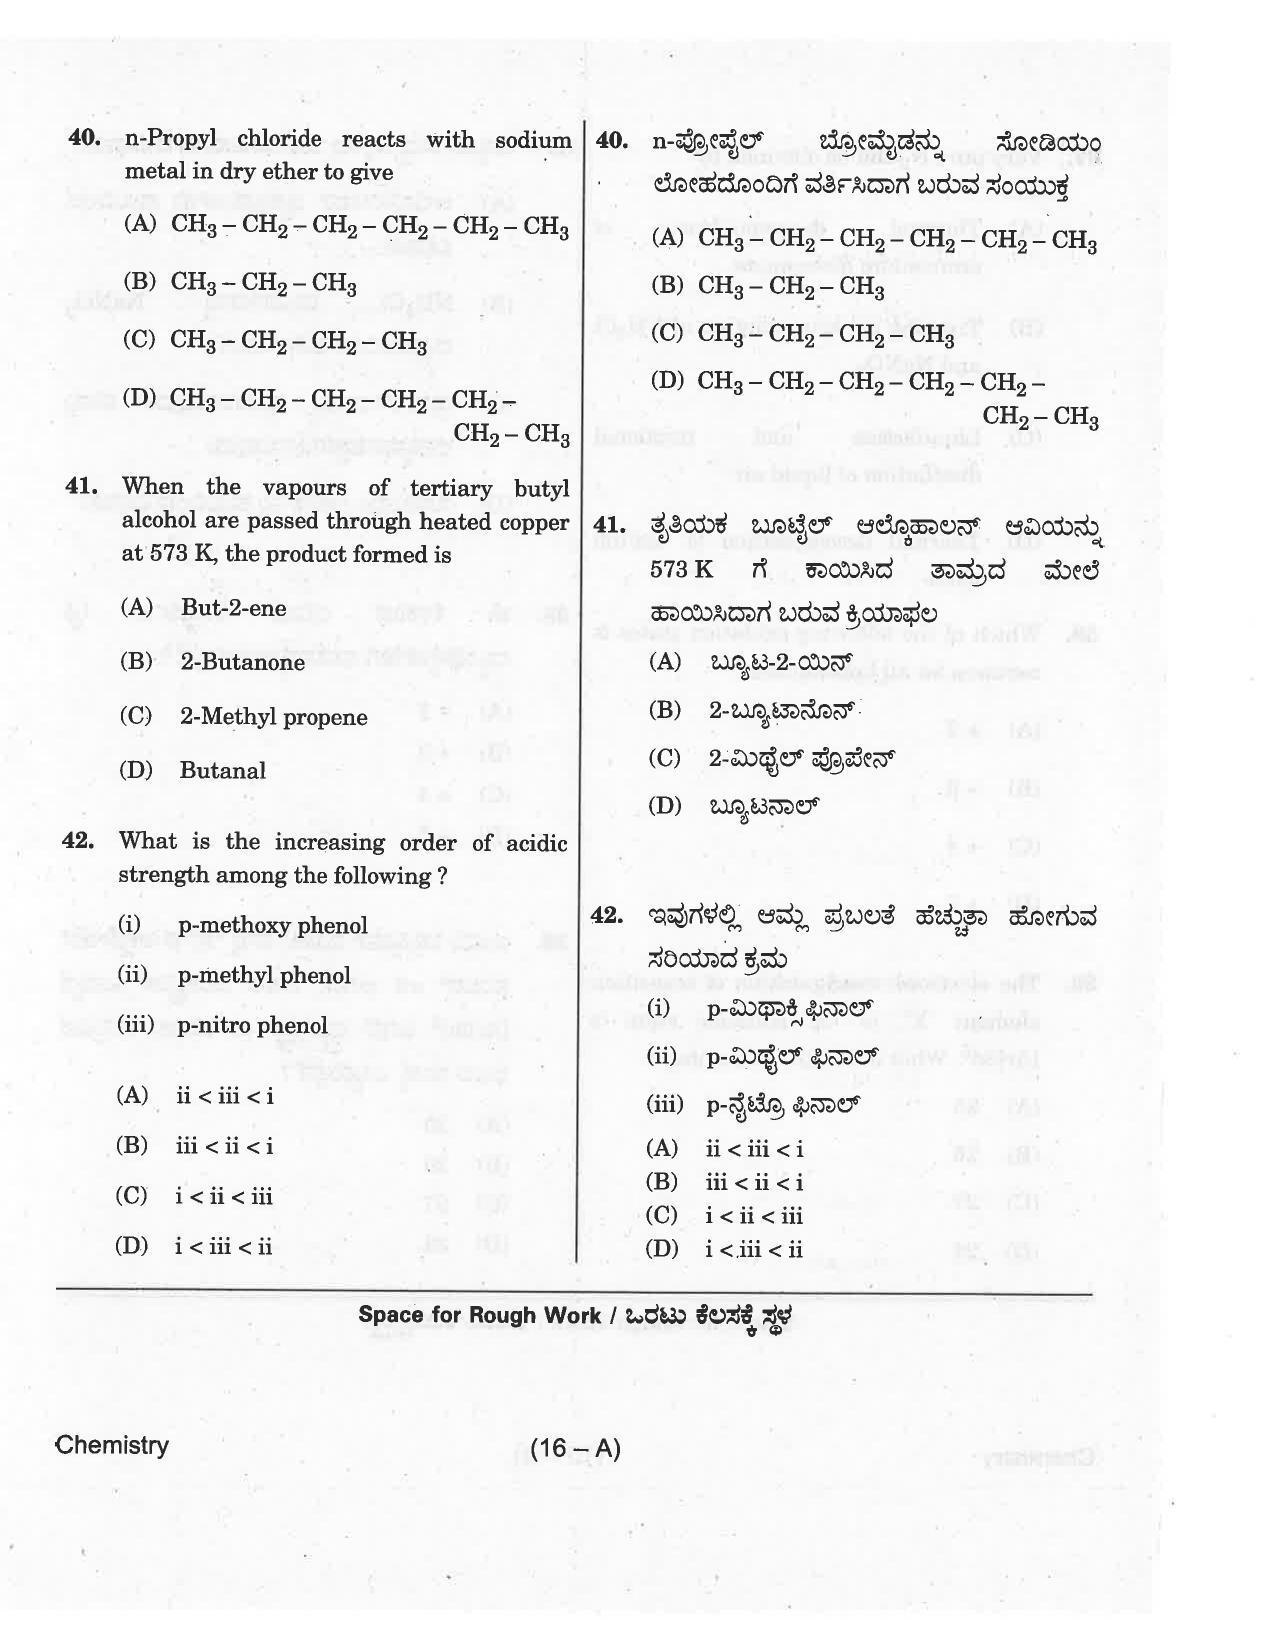 KCET Chemistry 2018 Question Papers - Page 16